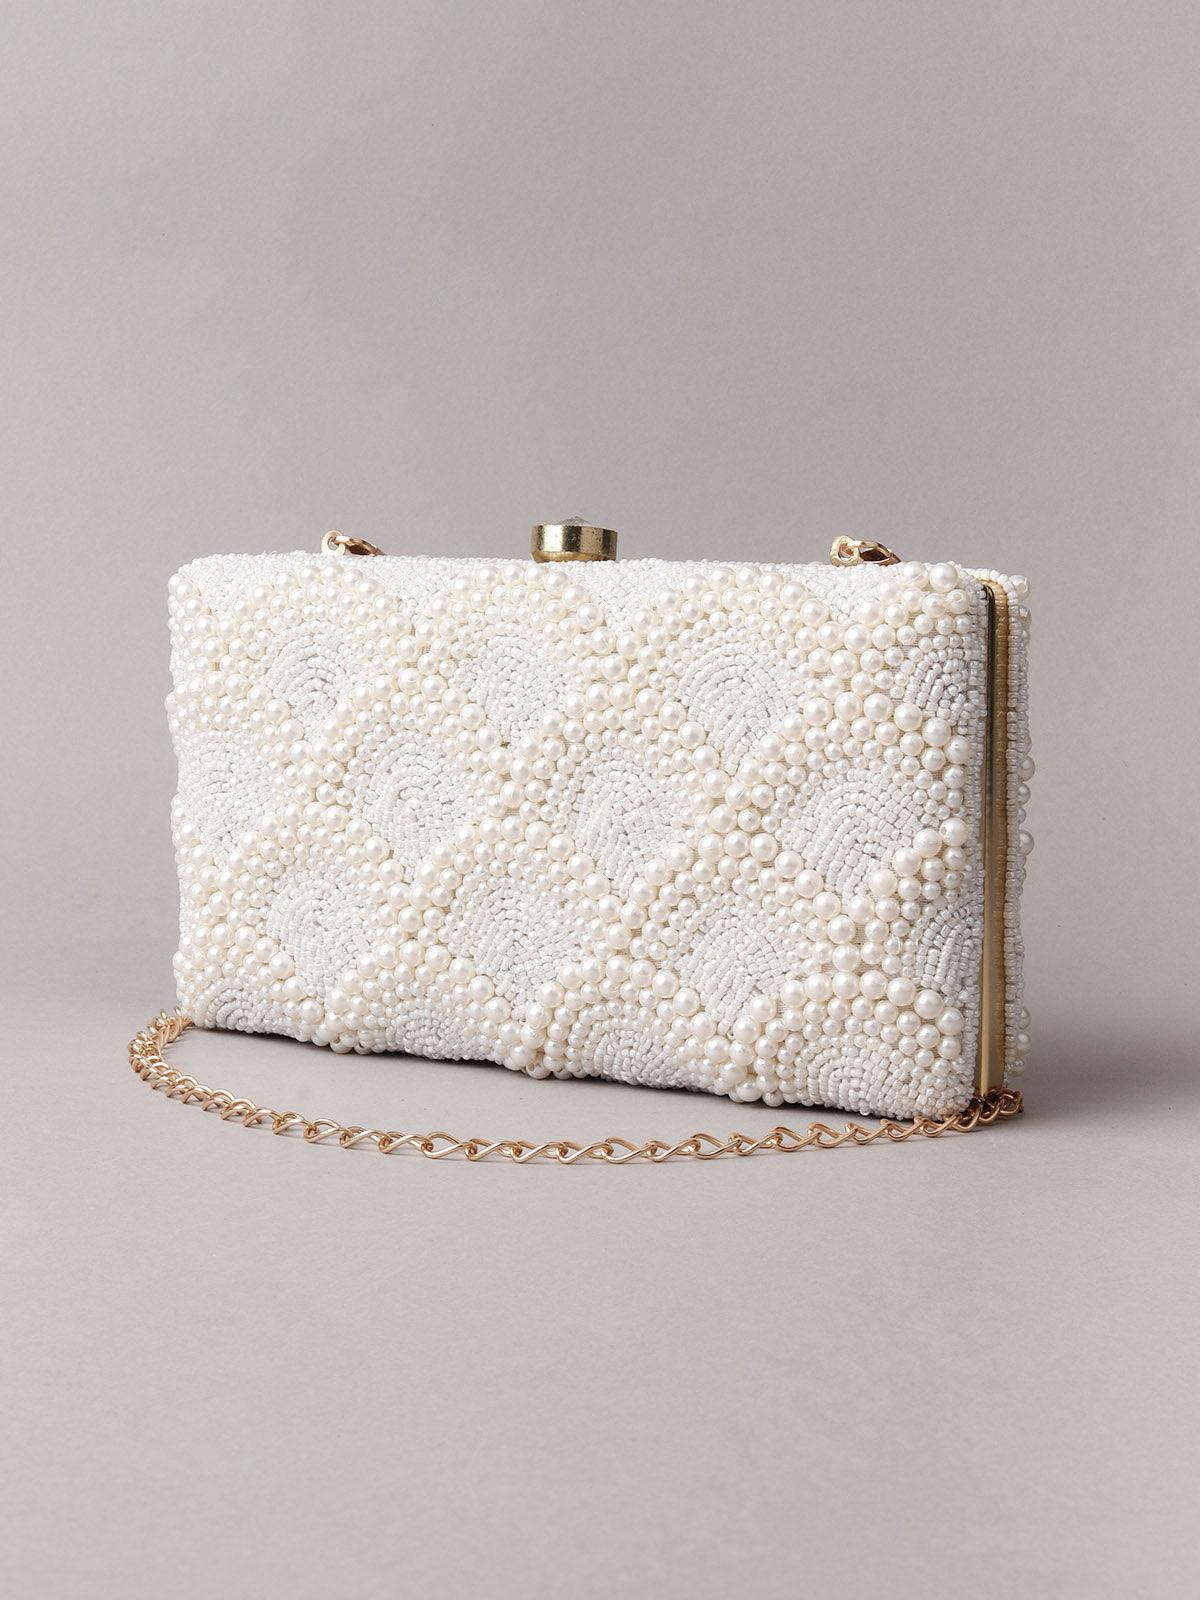 Enticing Rectangular White Pearly Clutch! - Odette